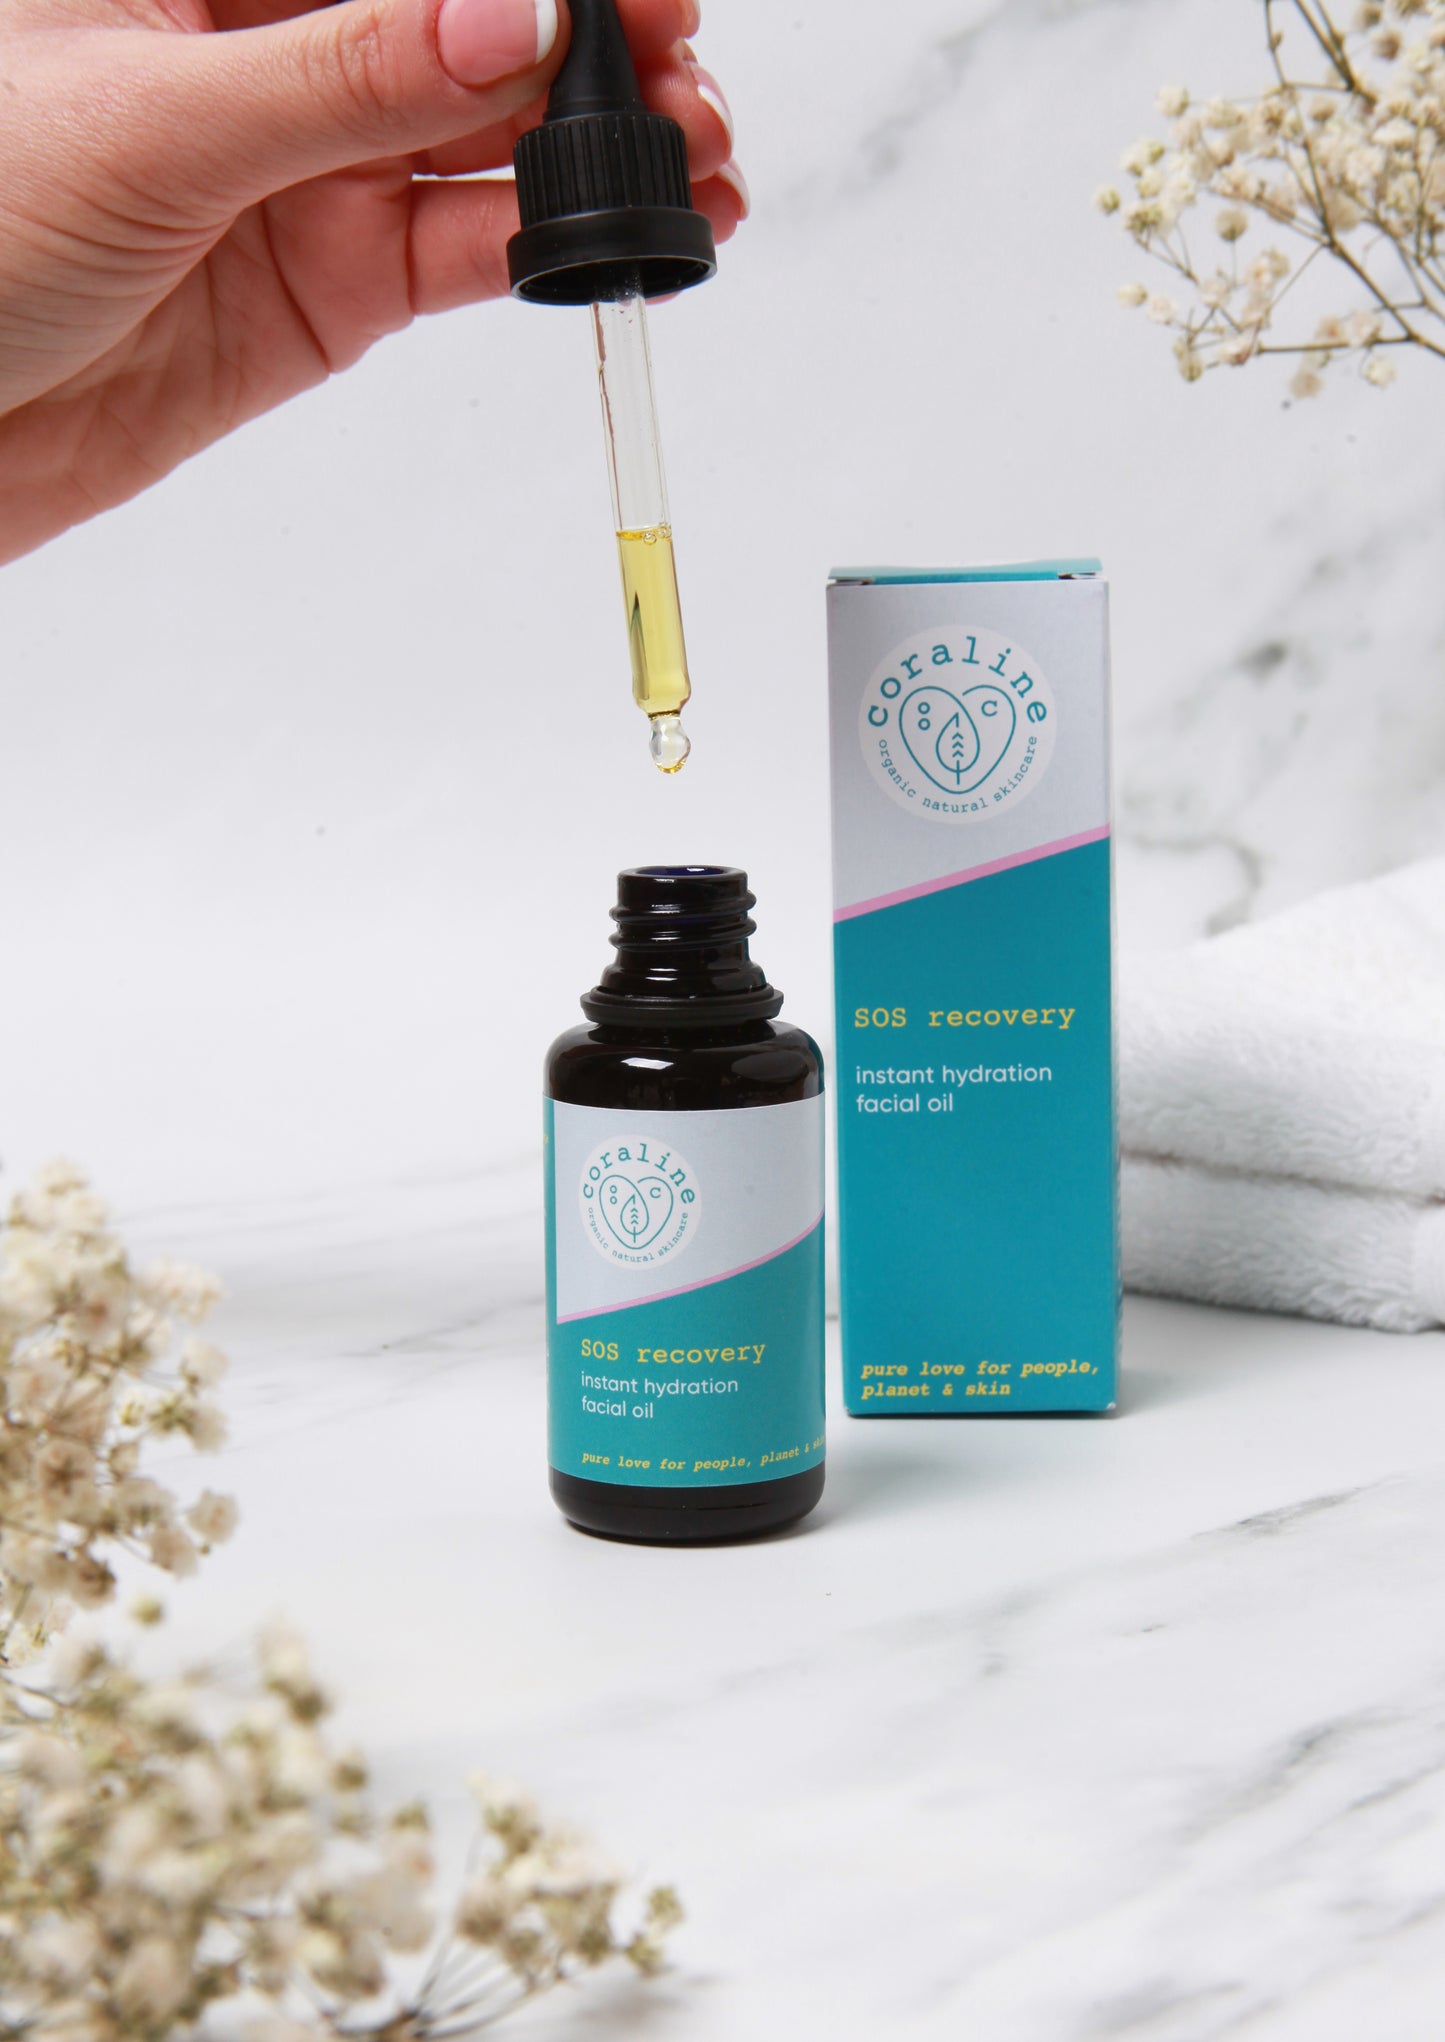 A hand holds a dropper above a small bottle of Coraline Skincare “SOS recovery instant hydration facial oil”. The bottle is open, and the dropper is filled with yellow oil. The product's packaging is visible in the background against a marble surface with white flowers nearby.